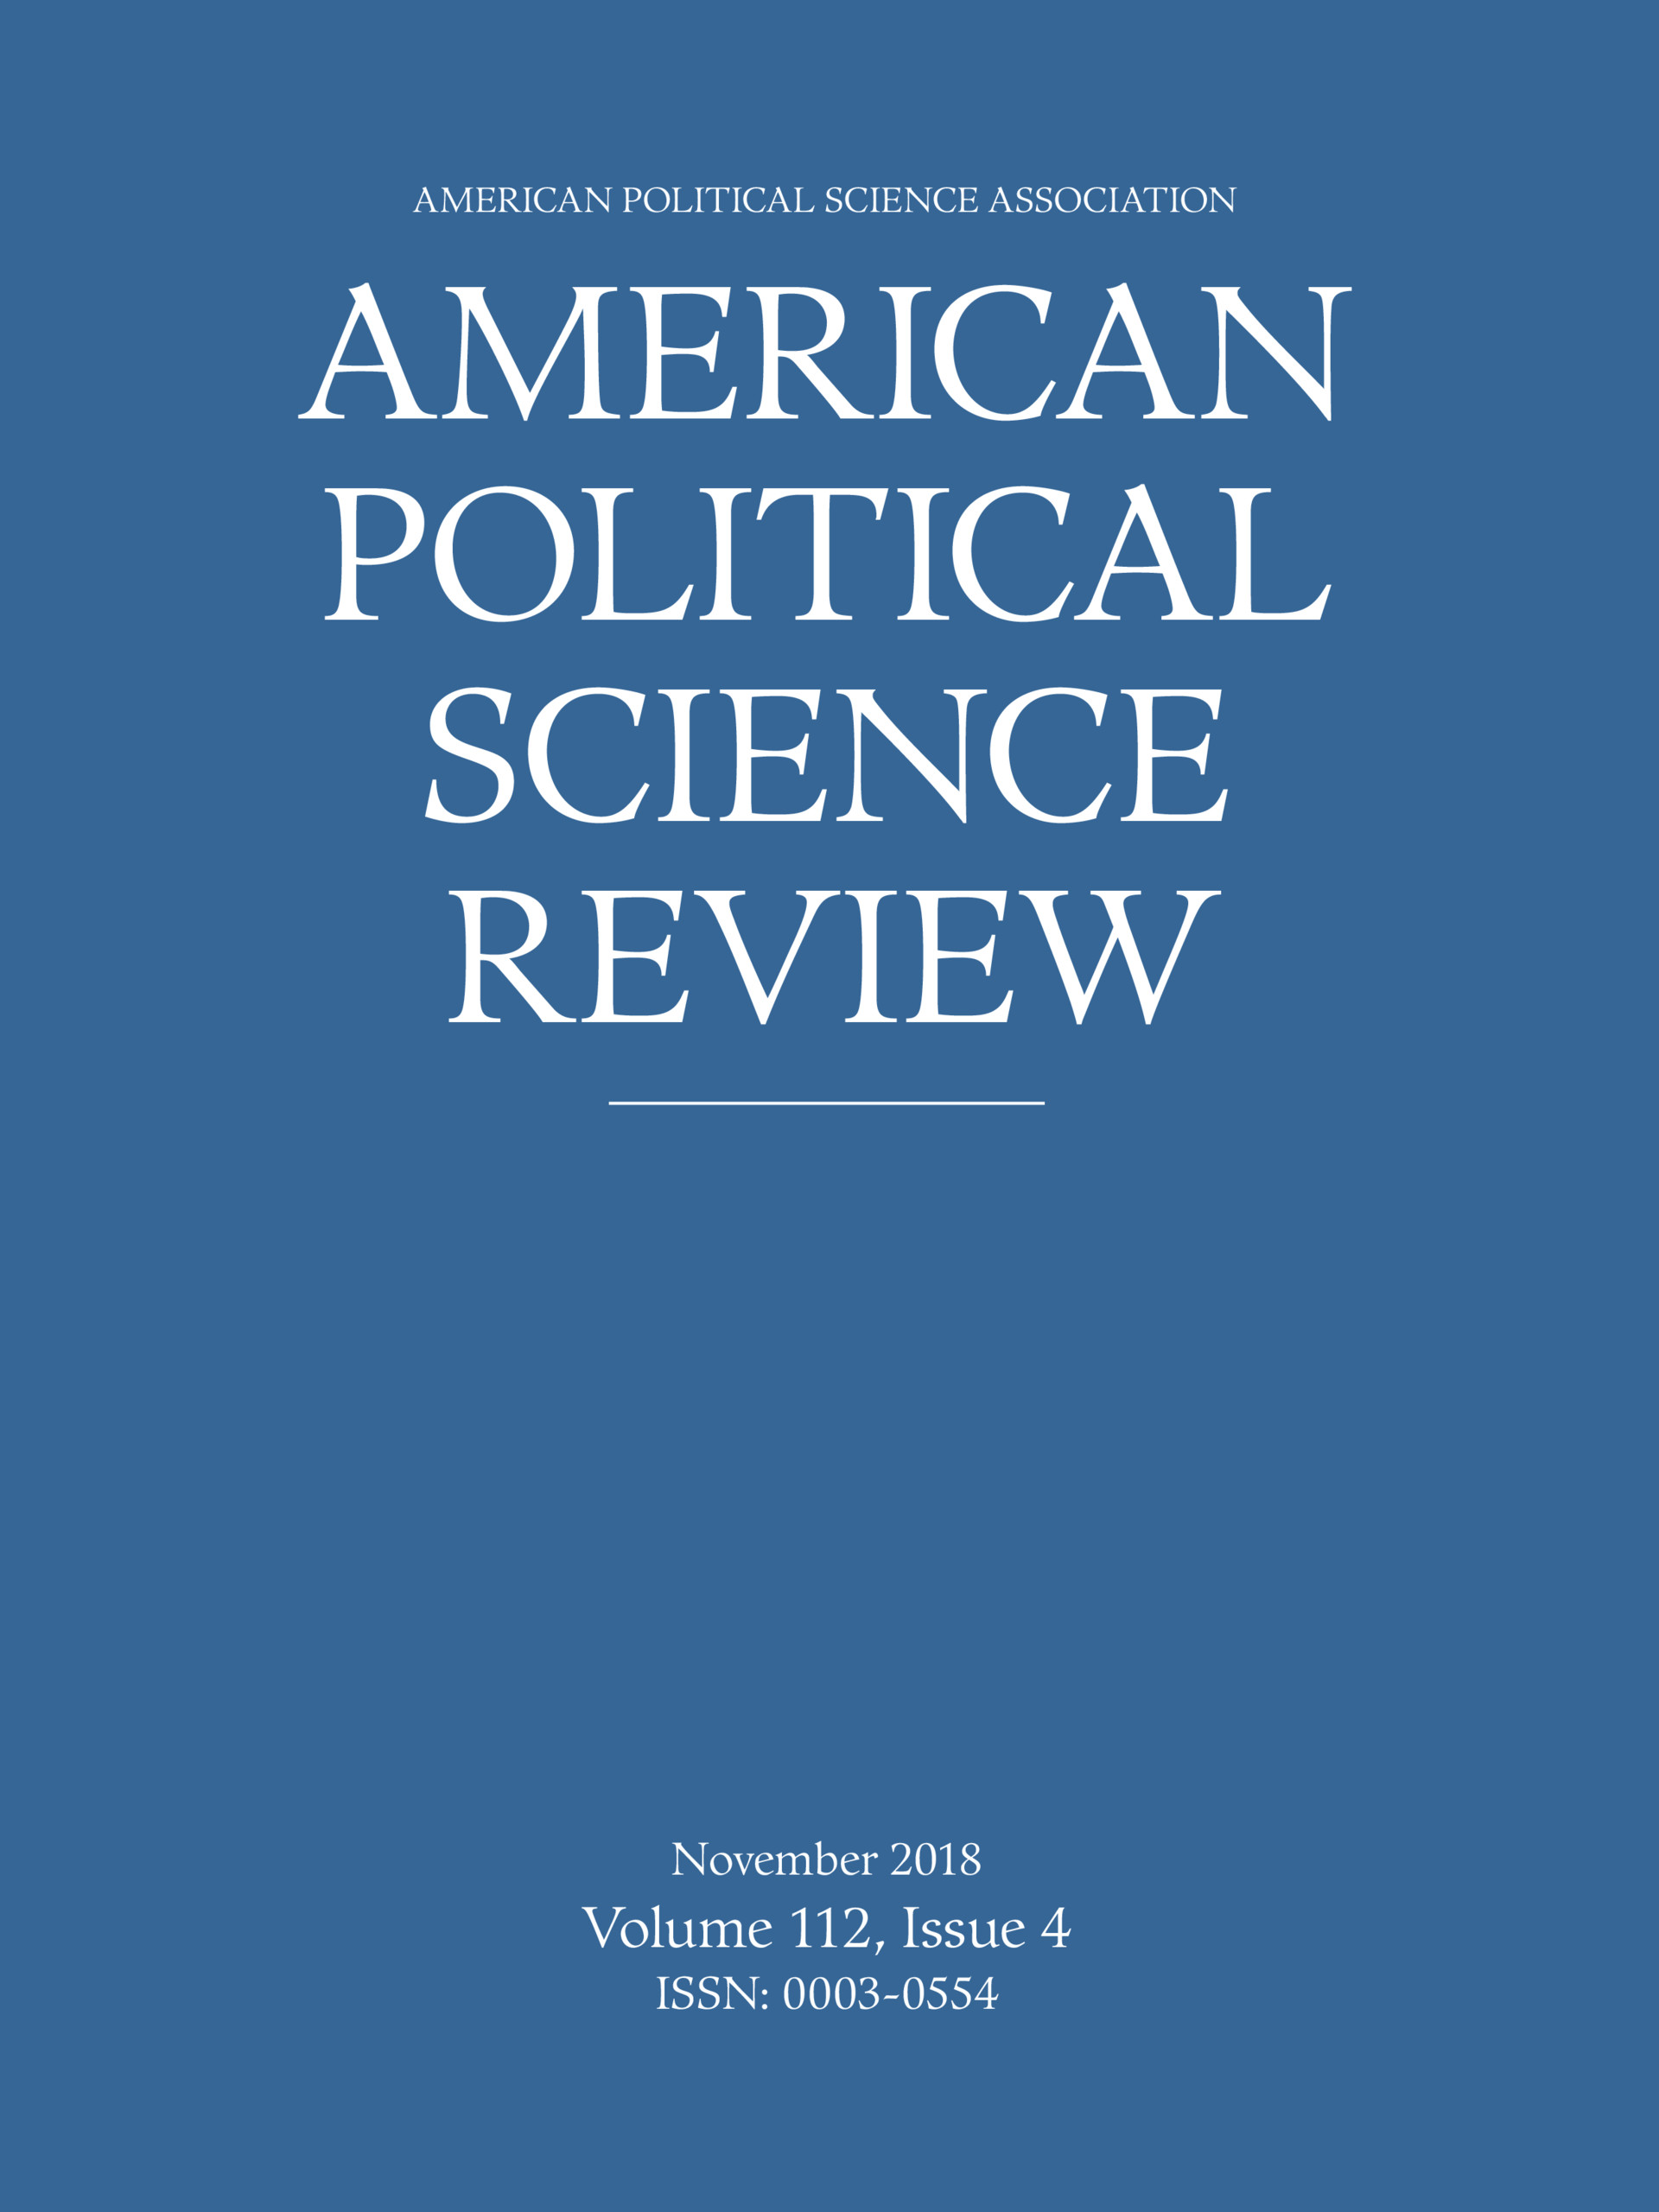 what is a literature review in political science